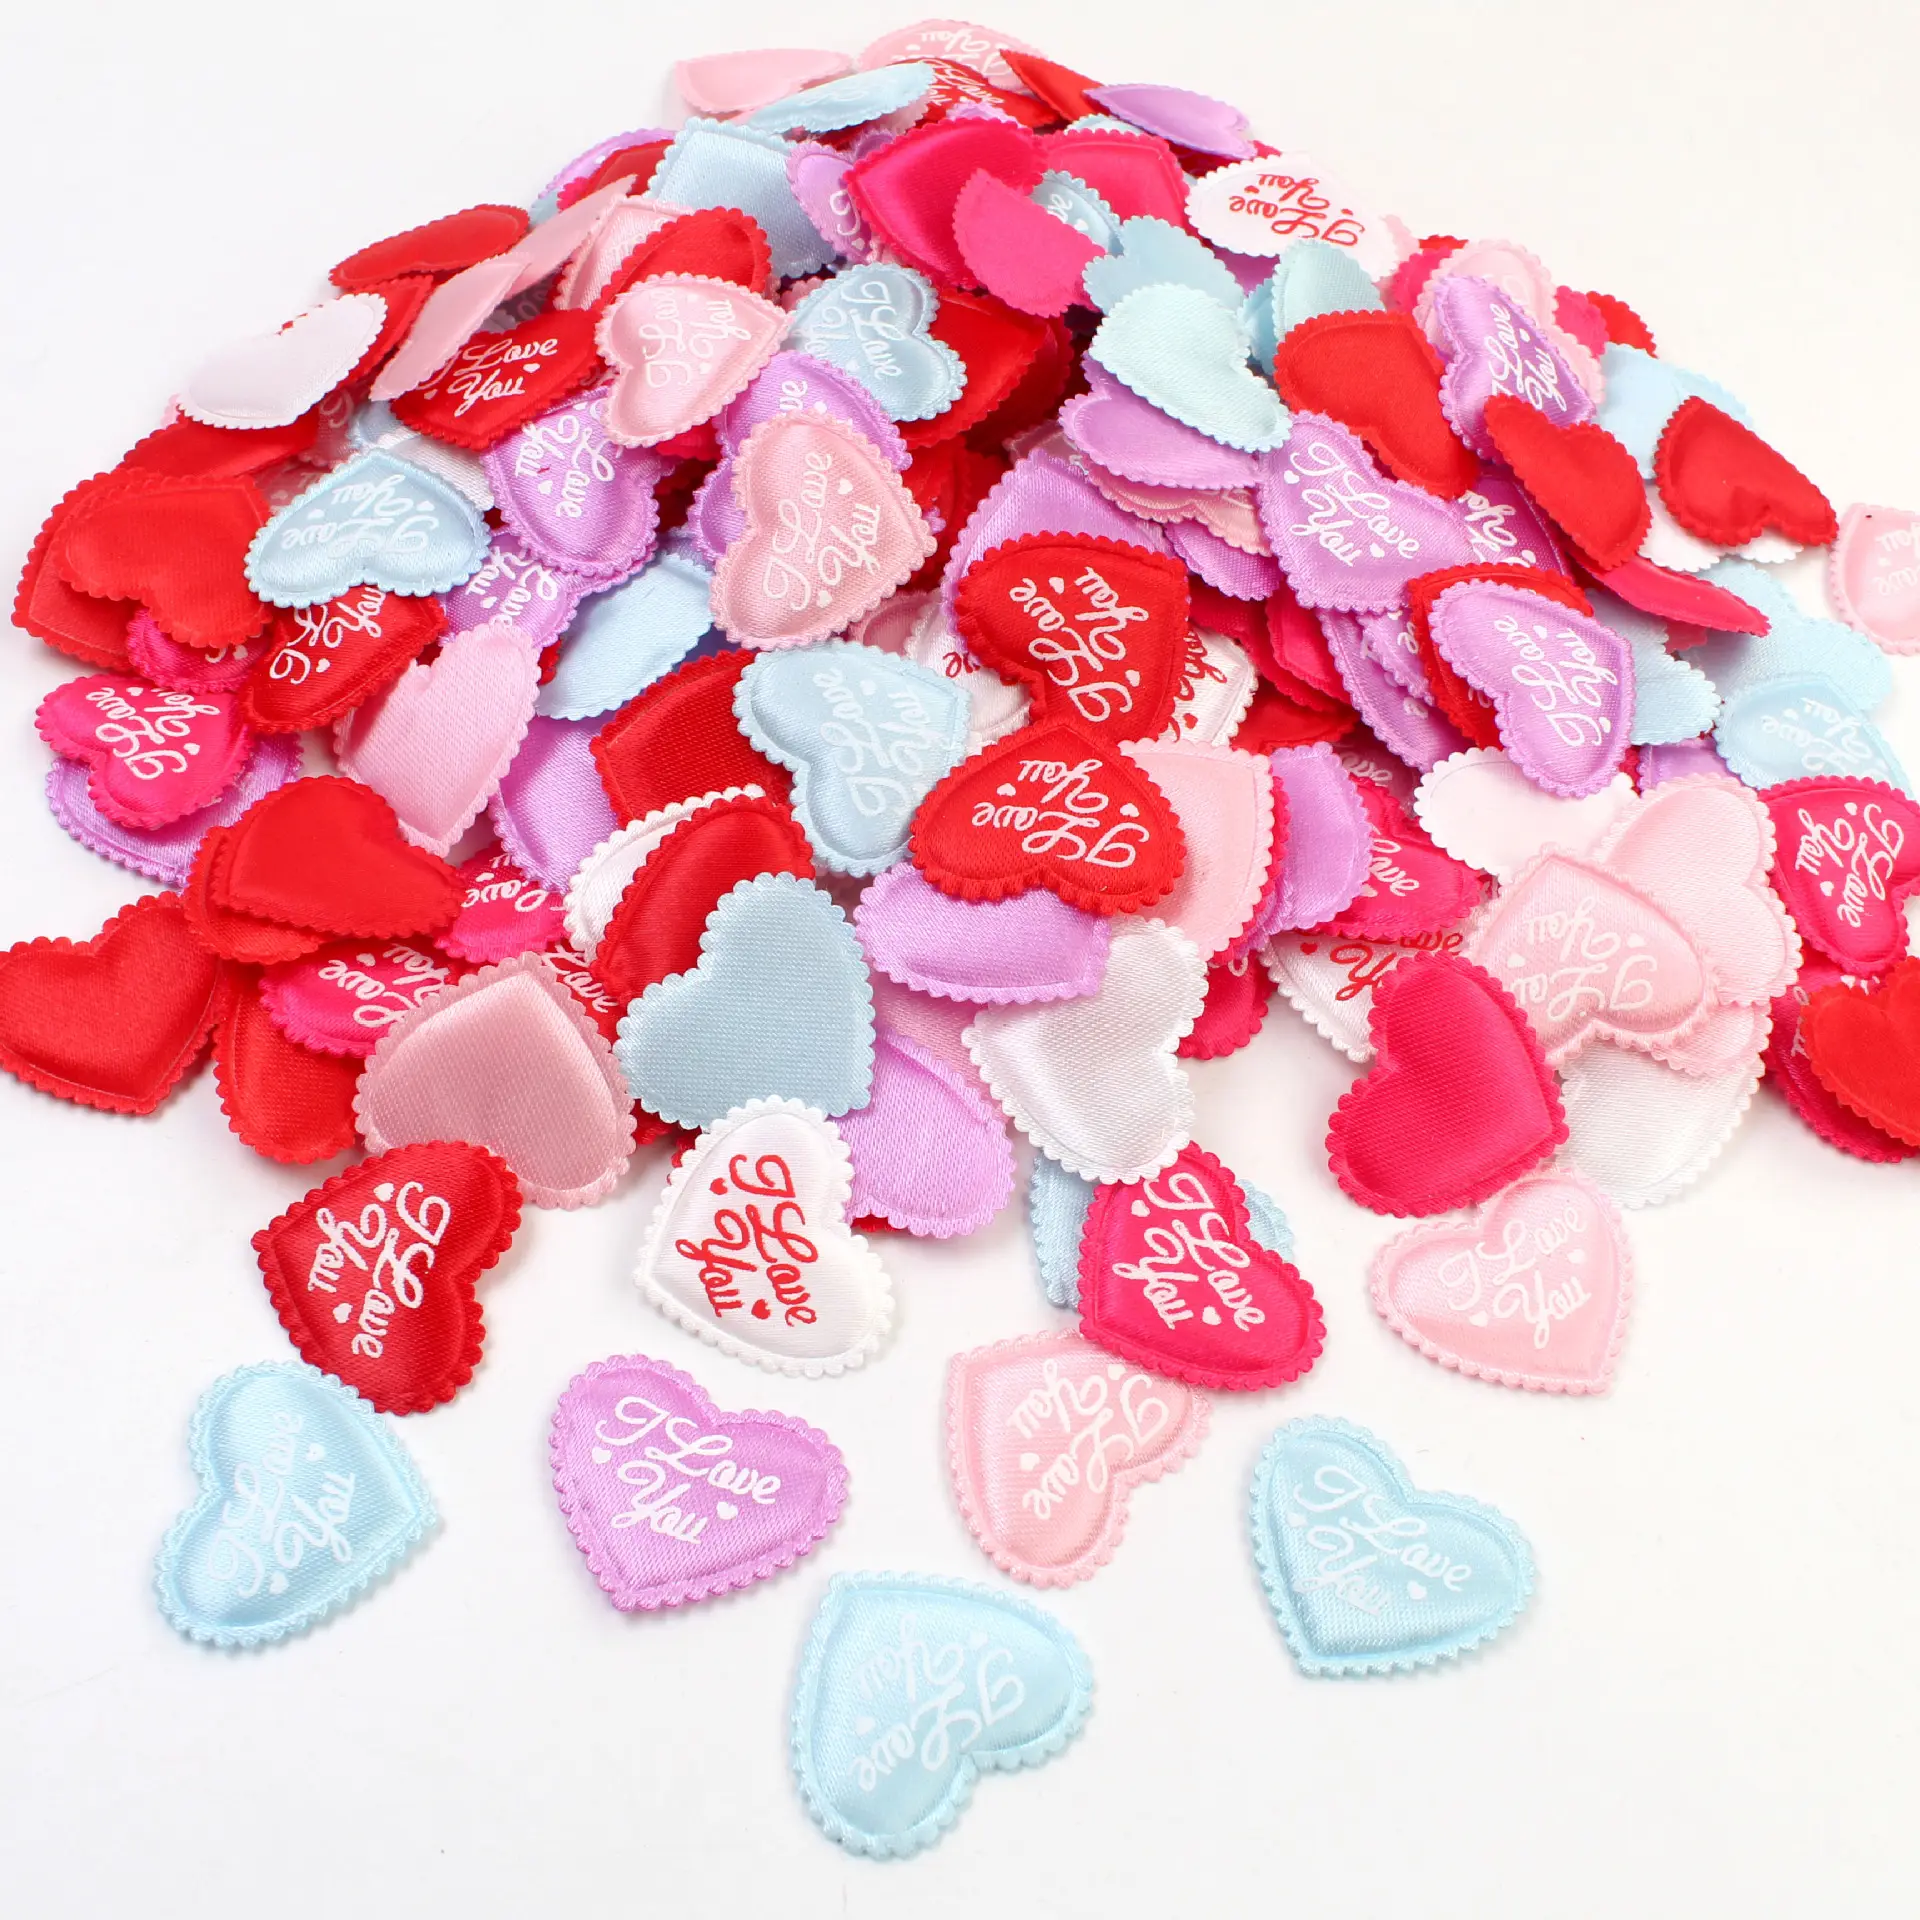 100pcs 3.5cm Sponge I Love You Heart Wedding Confetti Throwing Petals For Love Bride Valentine's Day Gift Party Room Decoration